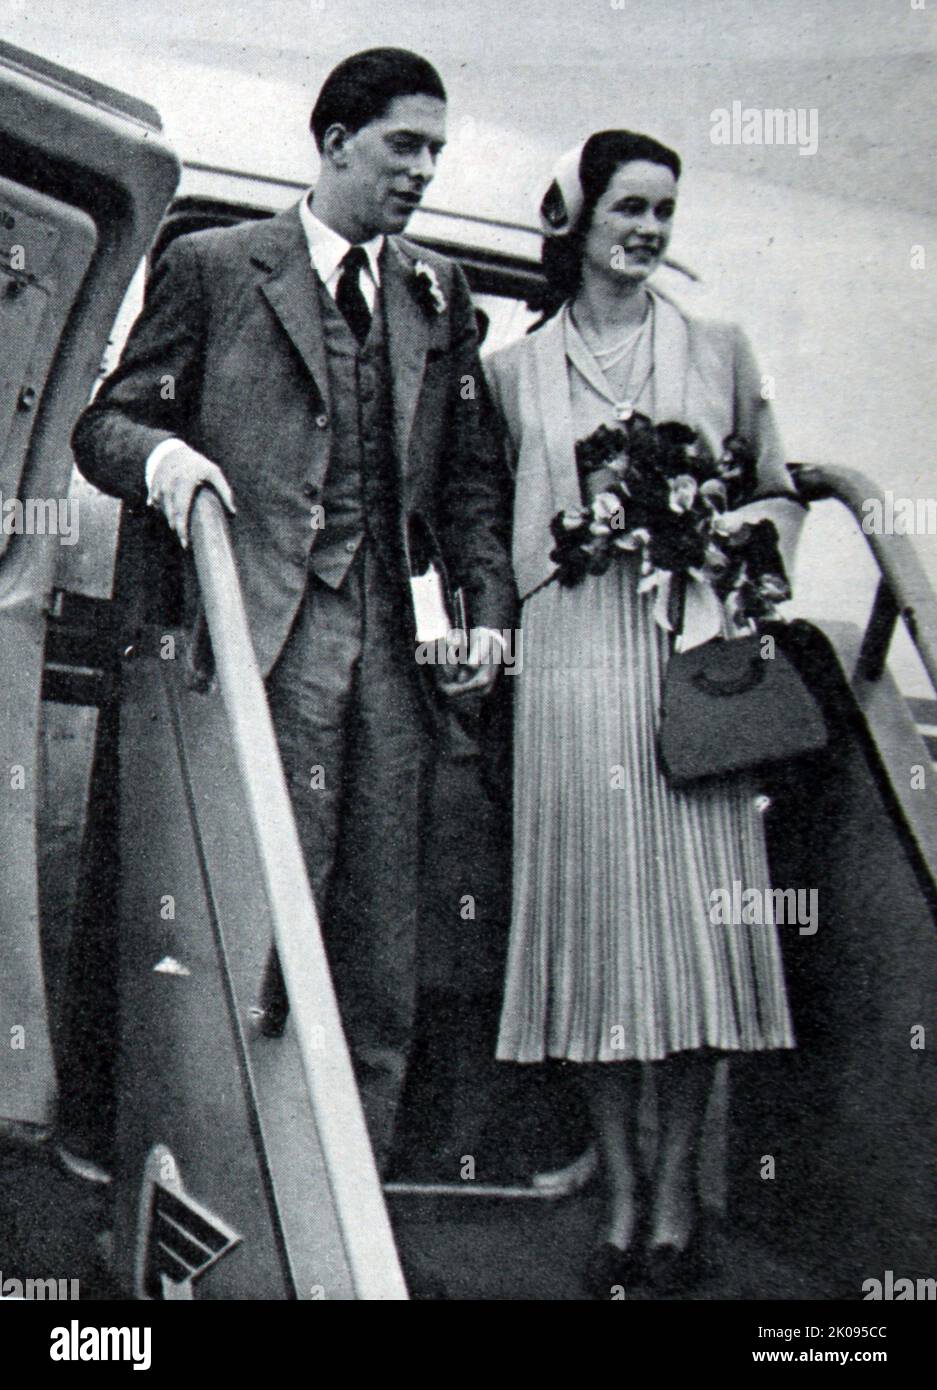 On 29 September 1949 at St. Mark's Church, London, Lord Harewood married Marion Stein, a concert pianist and the daughter of the Viennese music publisher Erwin Stein. George Henry Hubert Lascelles, 7th Earl of Harewood, KBE, AM (7 February 1923 - 11 July 2011), styled The Honourable George Lascelles before 1929 and Viscount Lascelles between 1929 and 1947, was a British classical music administrator and author. Stock Photo